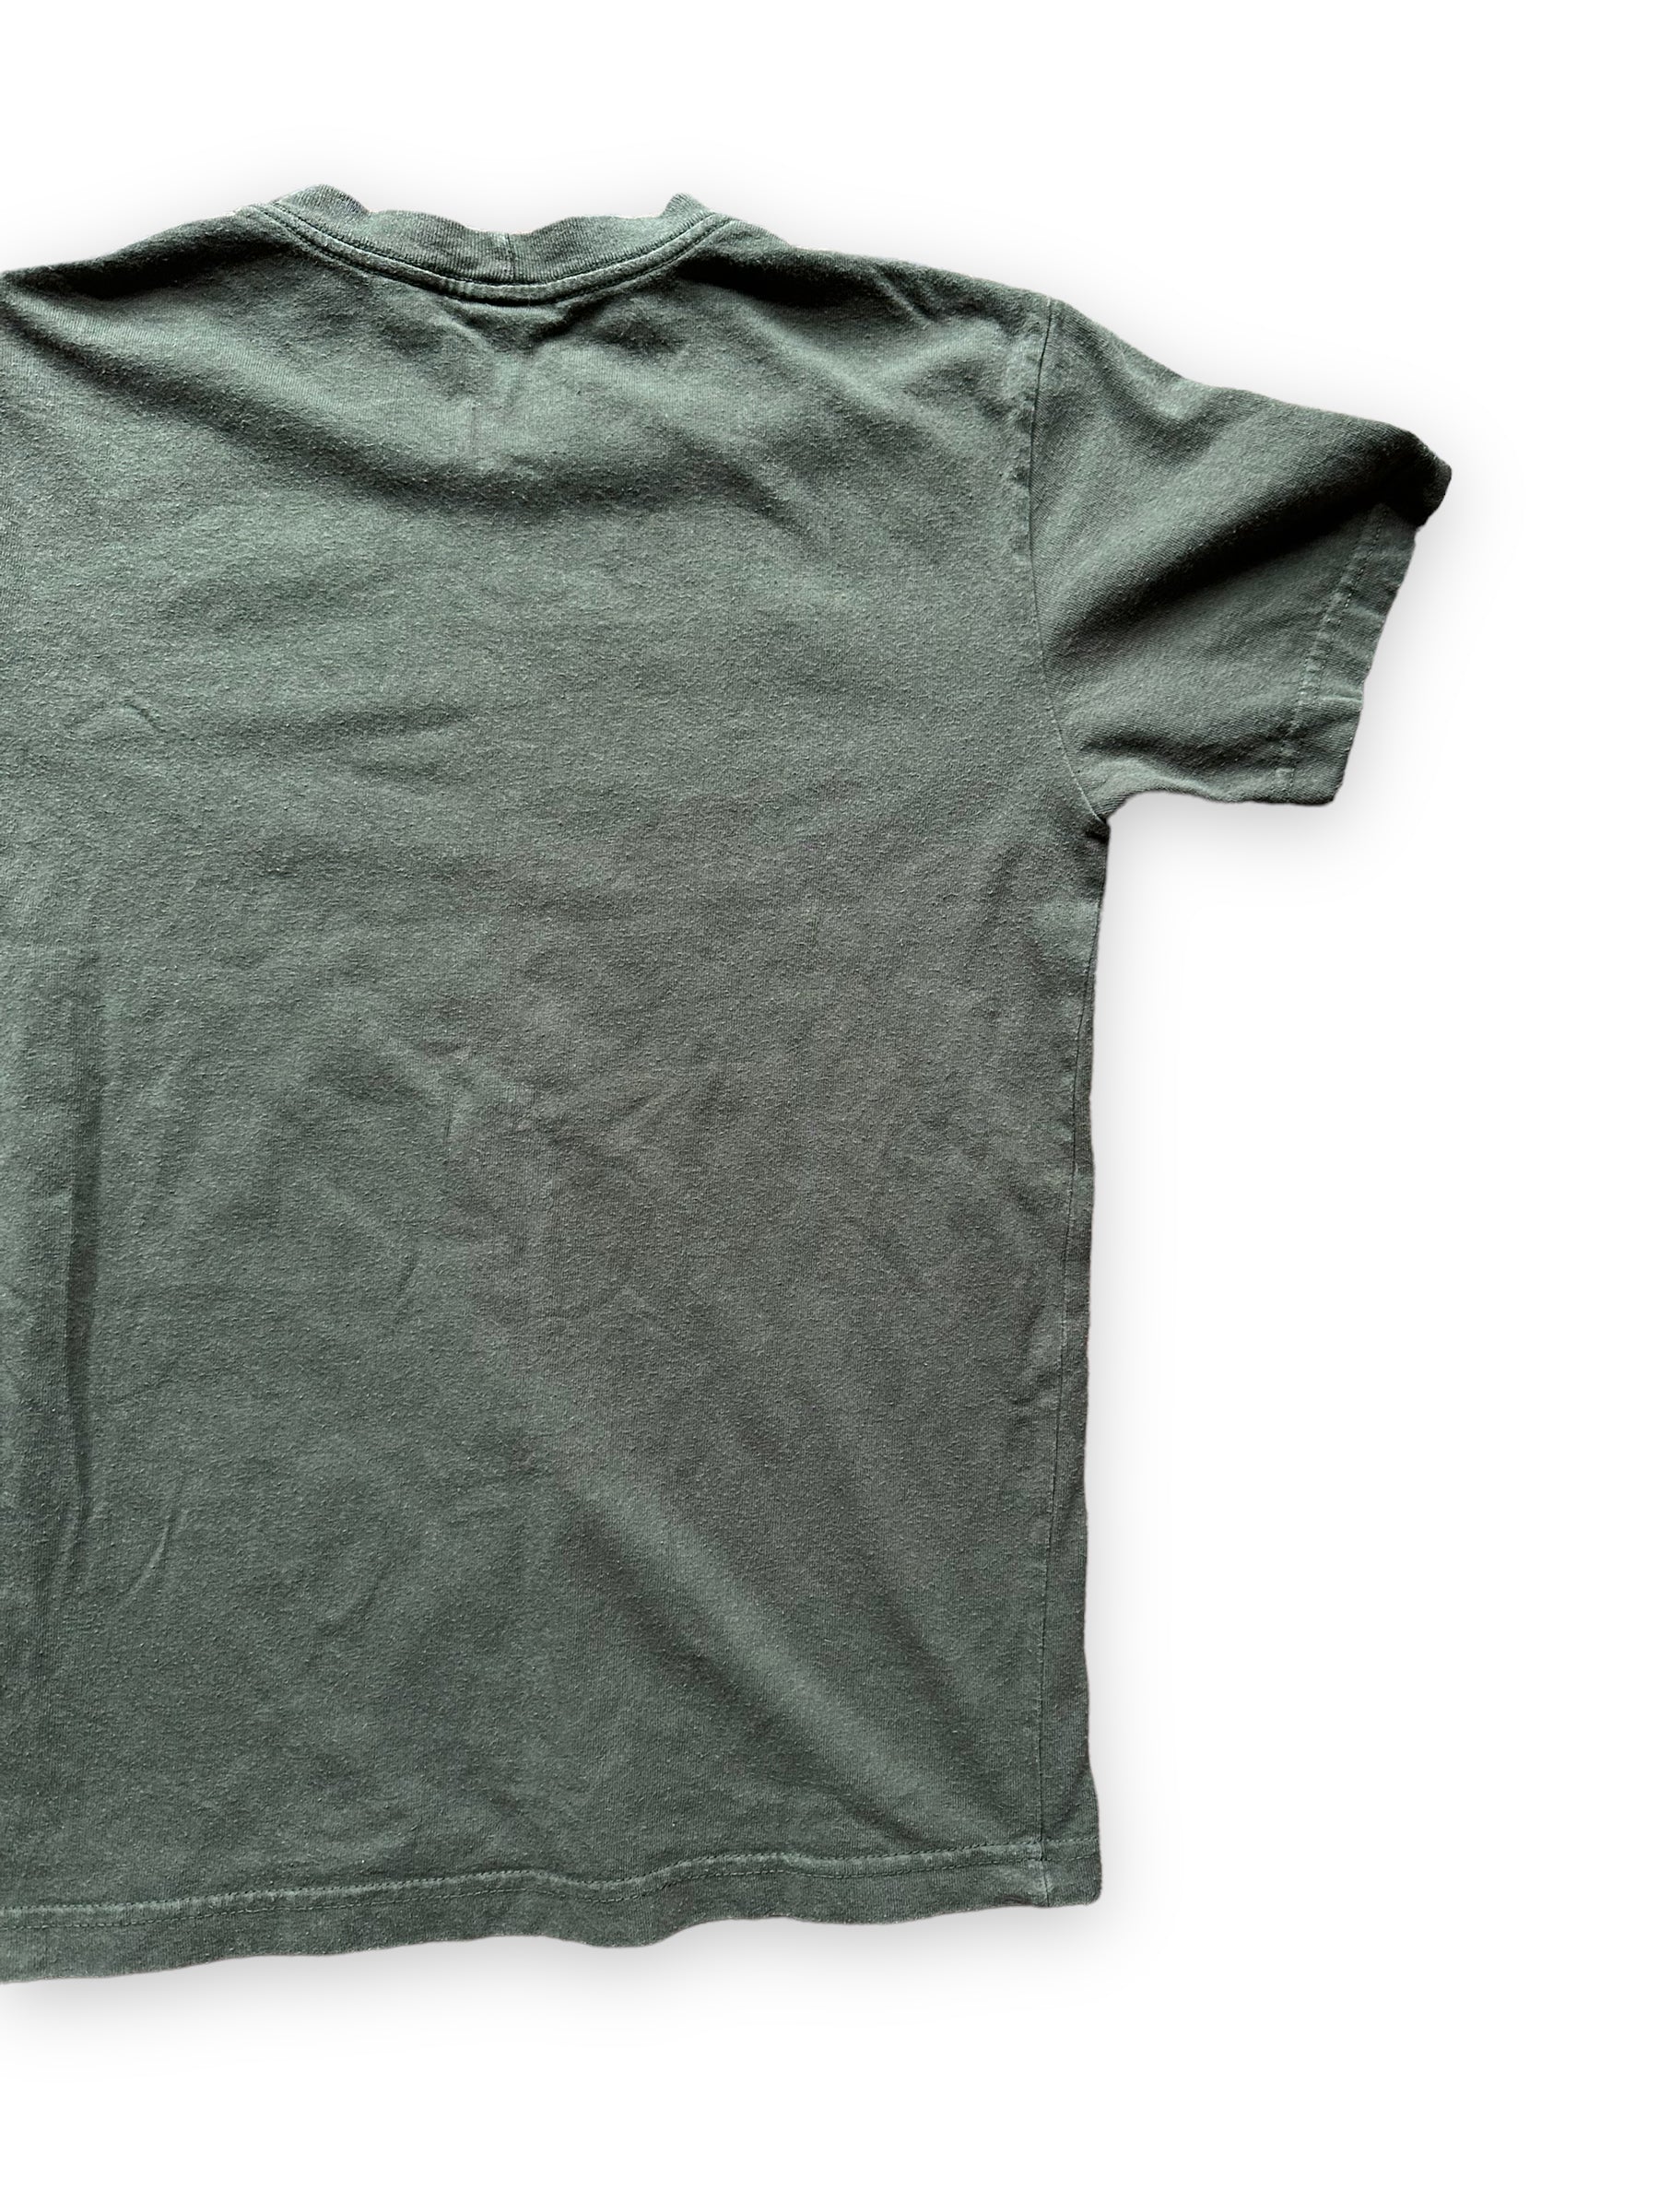 Right Rear View of Olive Green Filson Cotton Tee SZ XS  |  Barn Owl Vintage Goods | Filson Graphic Tees Seattle